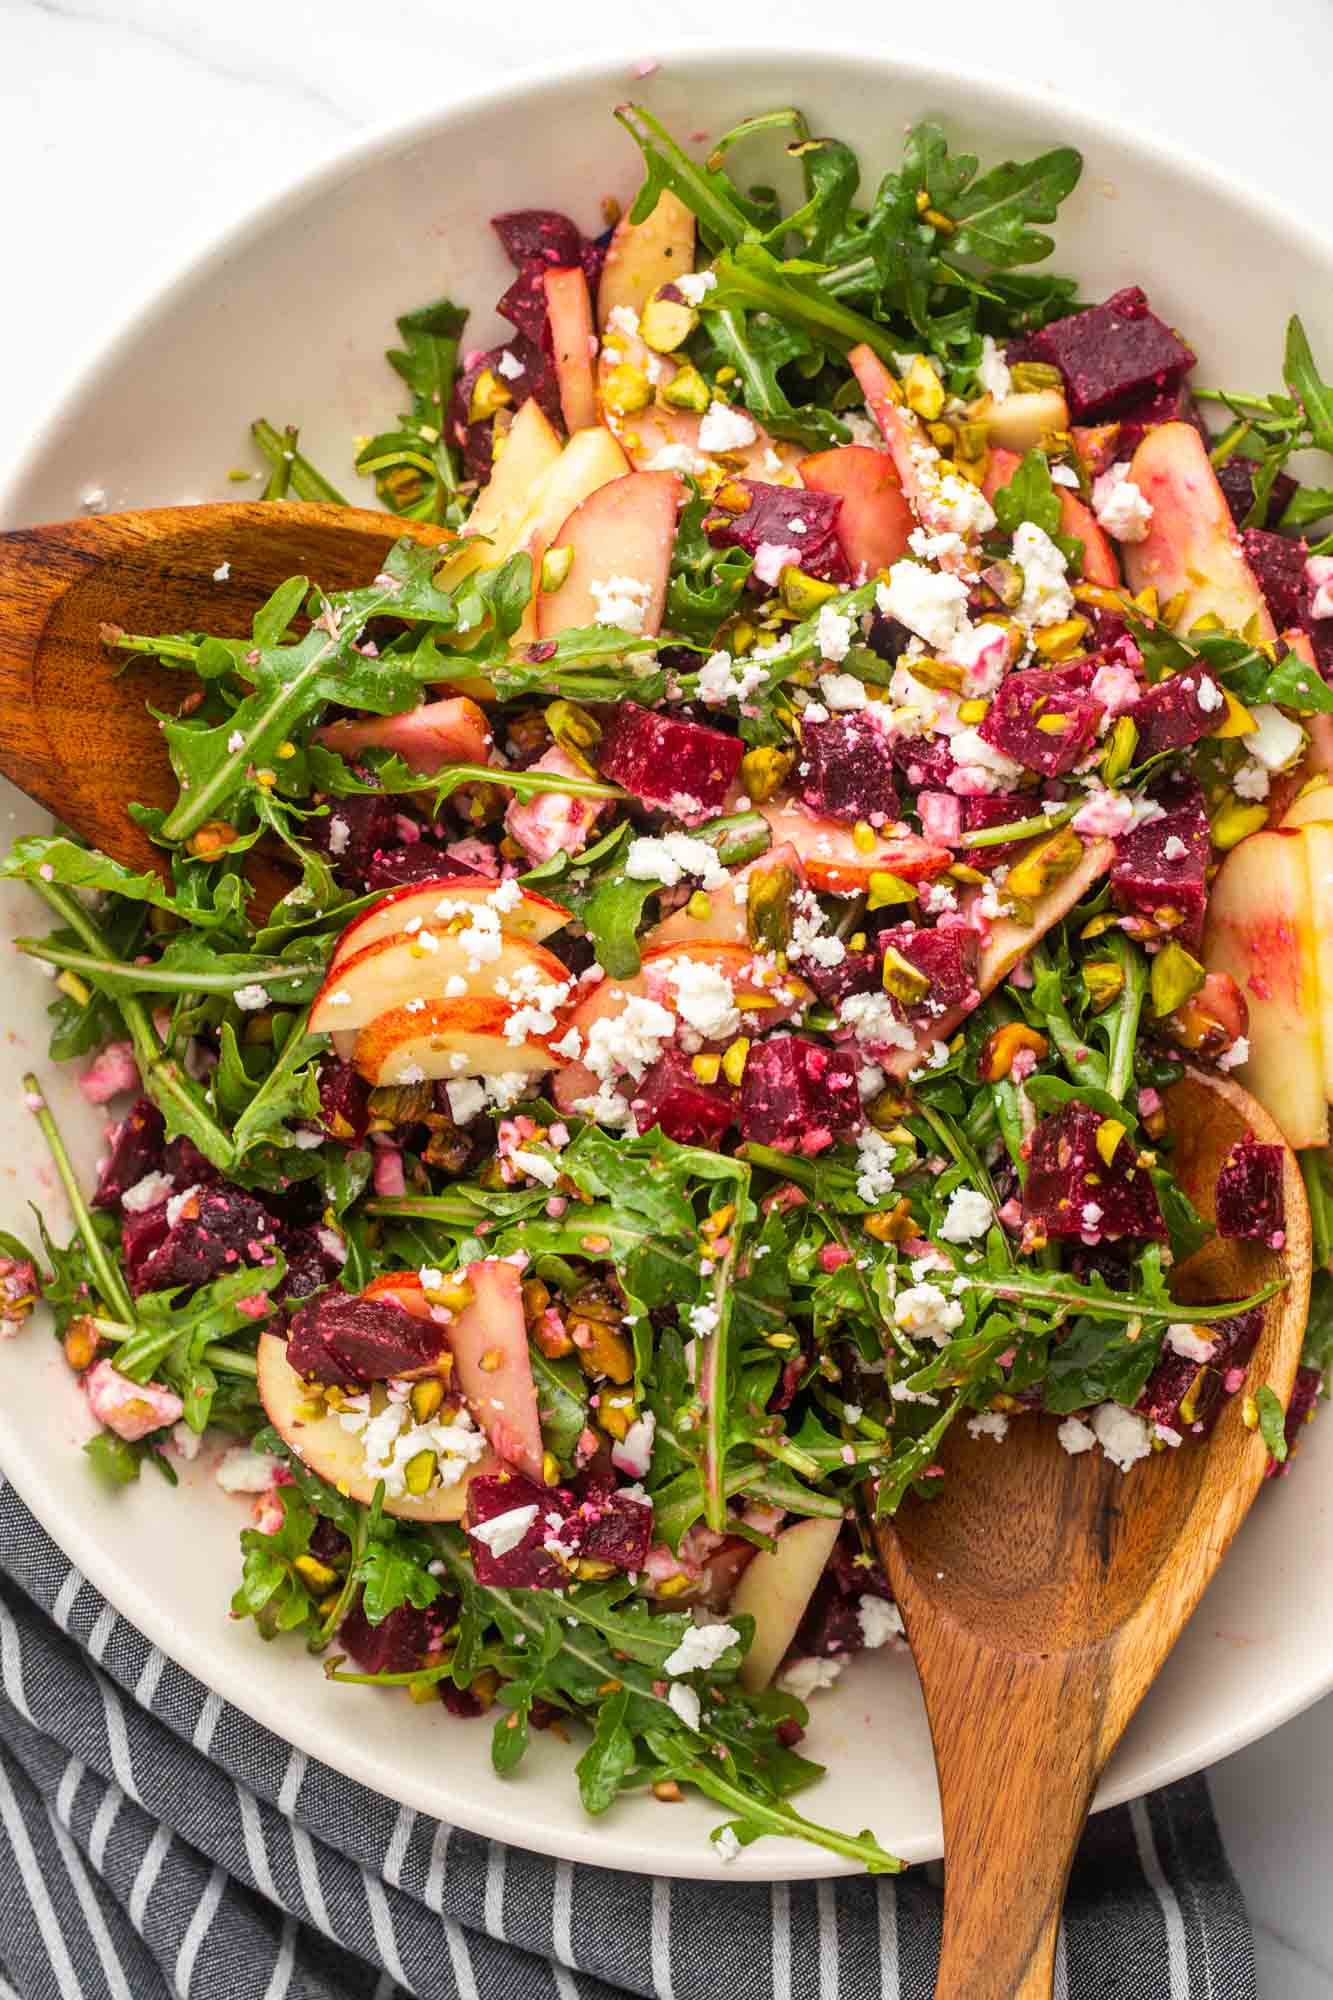 Overhead shot of beet salad in a large white bowl with wooden spoon servers